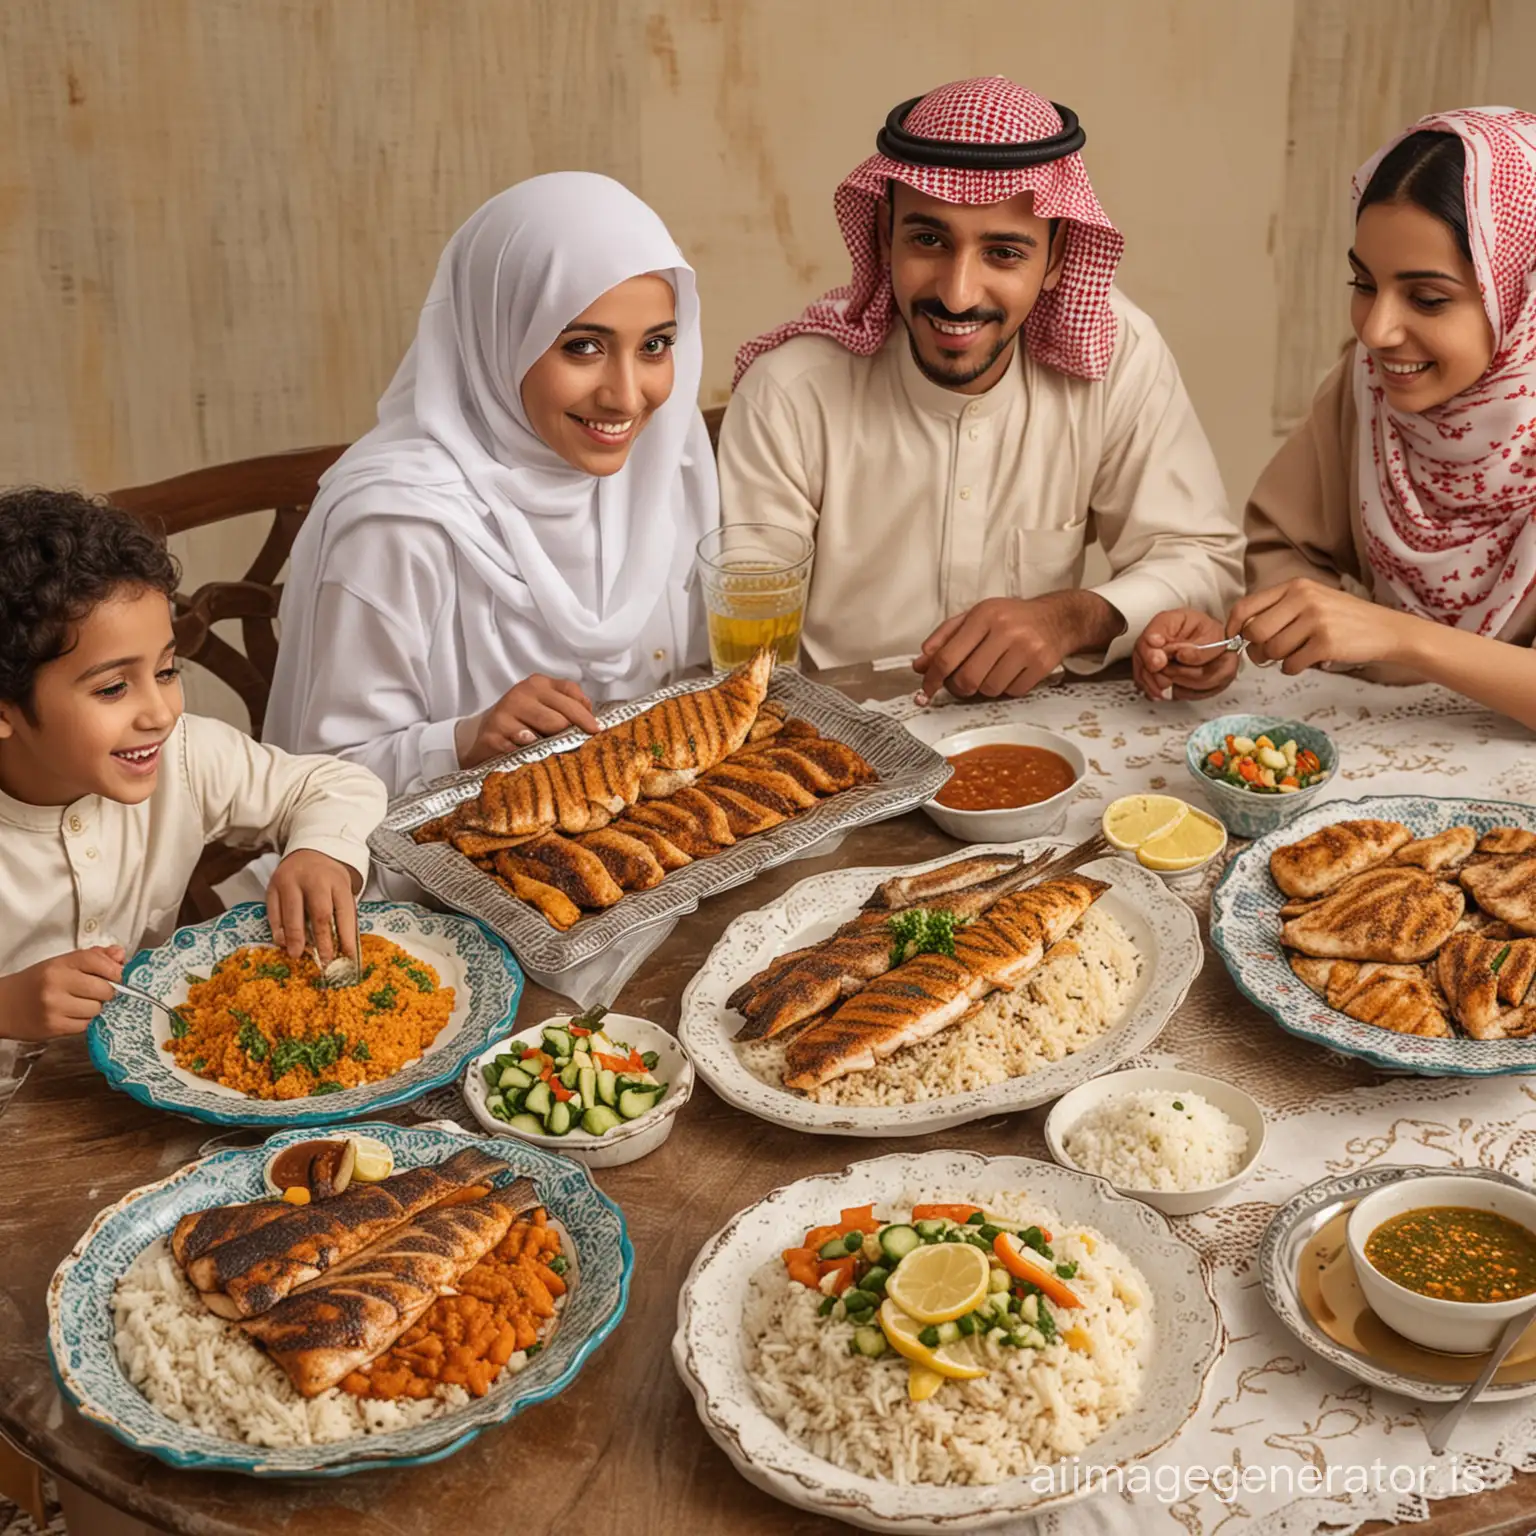 A Saudi Arabian family with pure faces eating grilled fish and rice on table